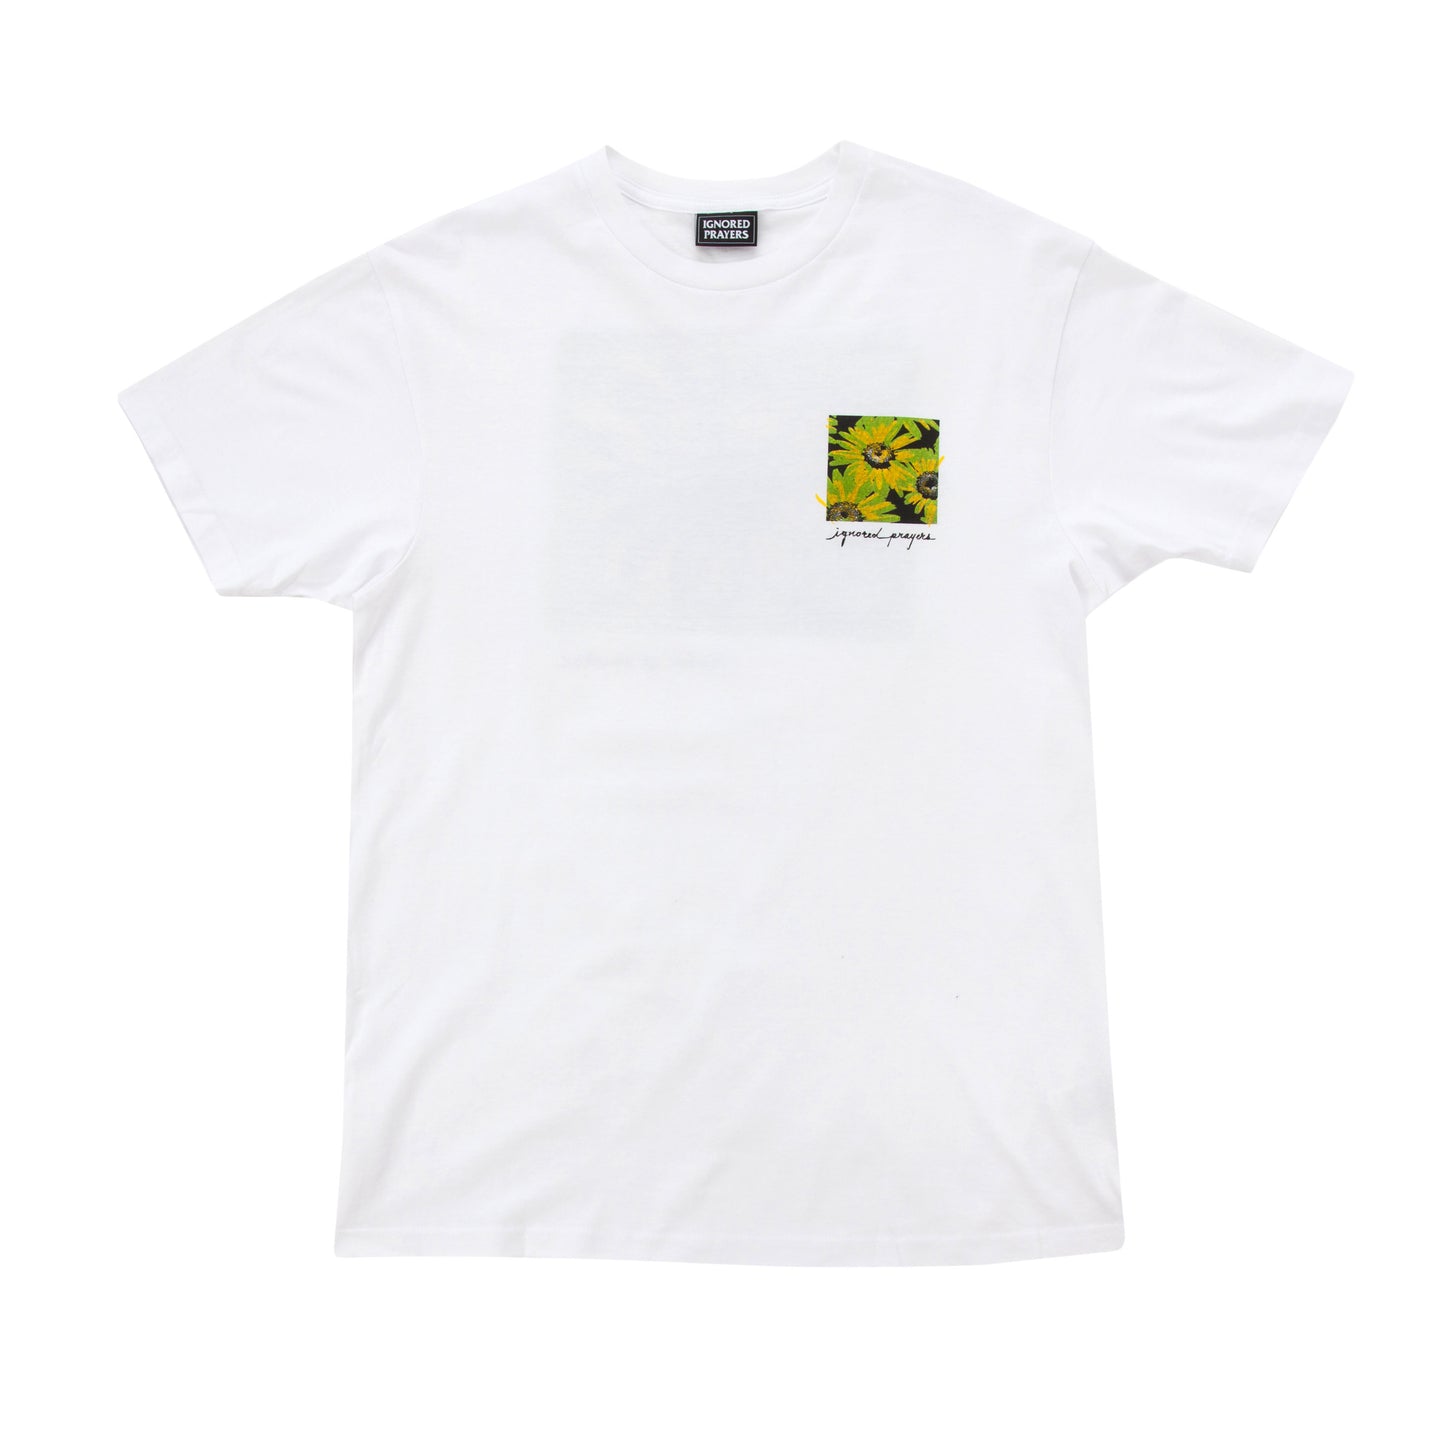 IN BLOOM T-SHIRT - WHITE